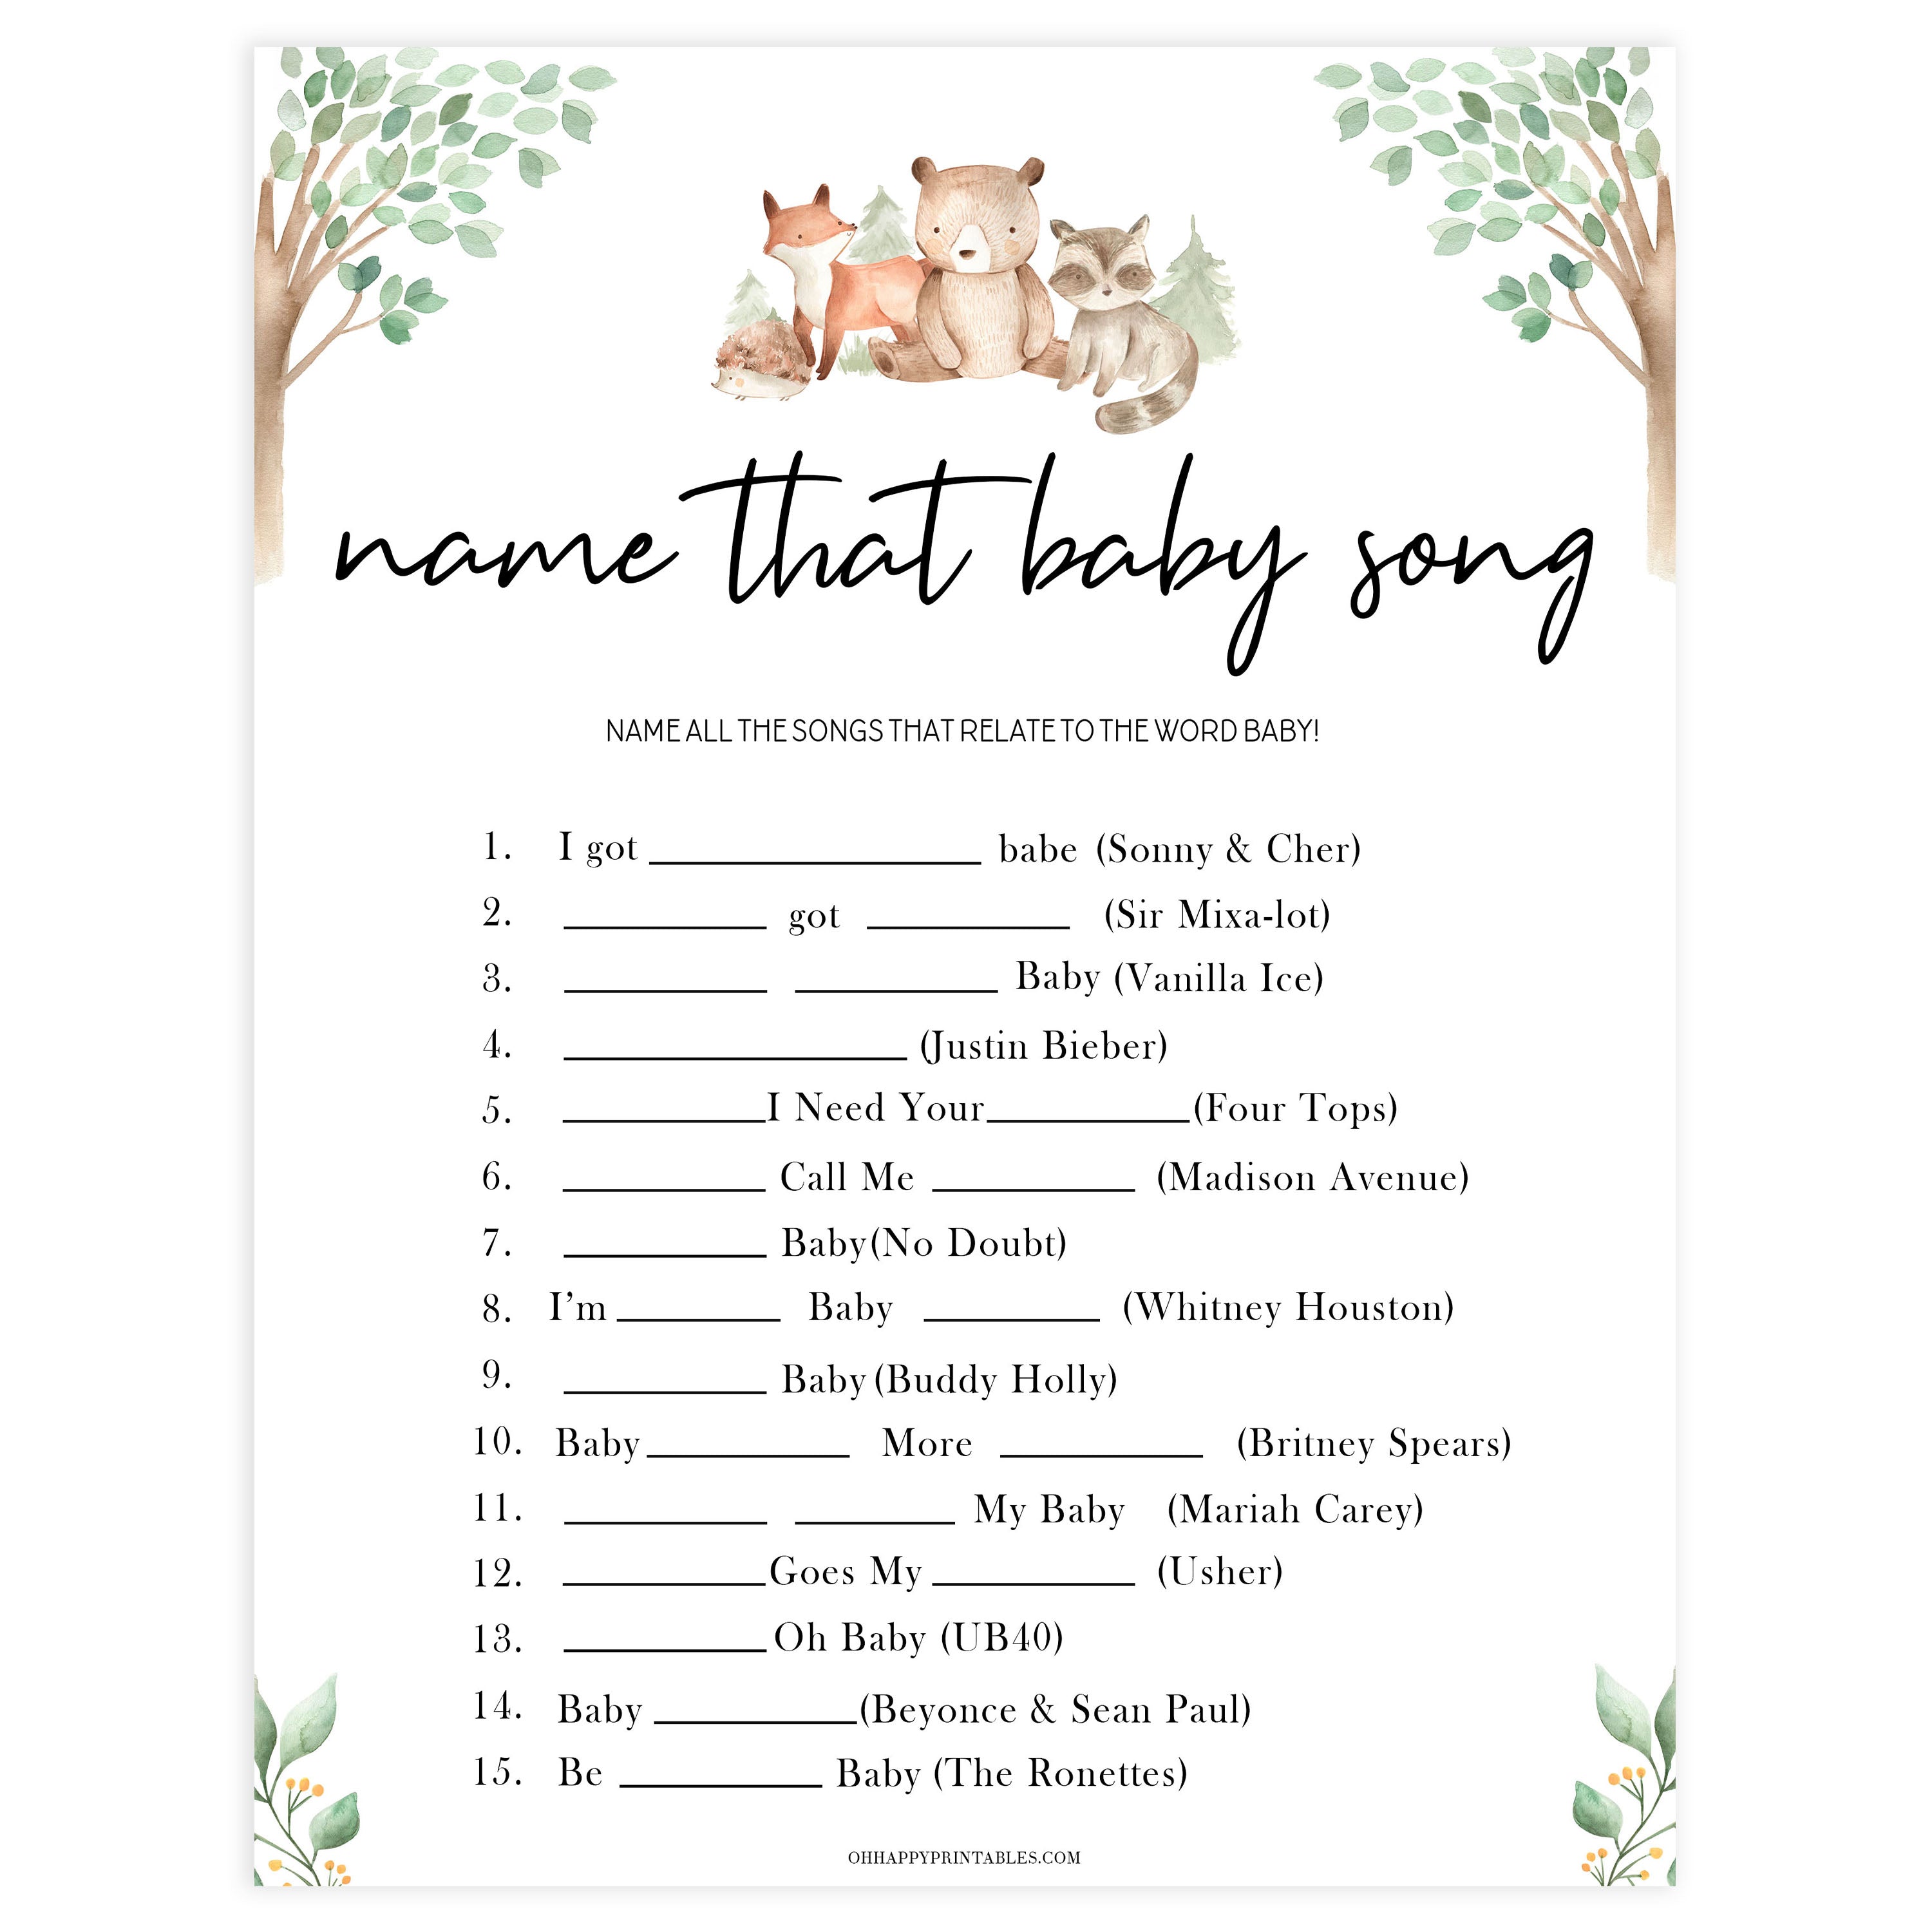 name that baby song game, Printable baby shower games, woodland animals baby games, baby shower games, fun baby shower ideas, top baby shower ideas, woodland baby shower, baby shower games, fun woodland animals baby shower ideas